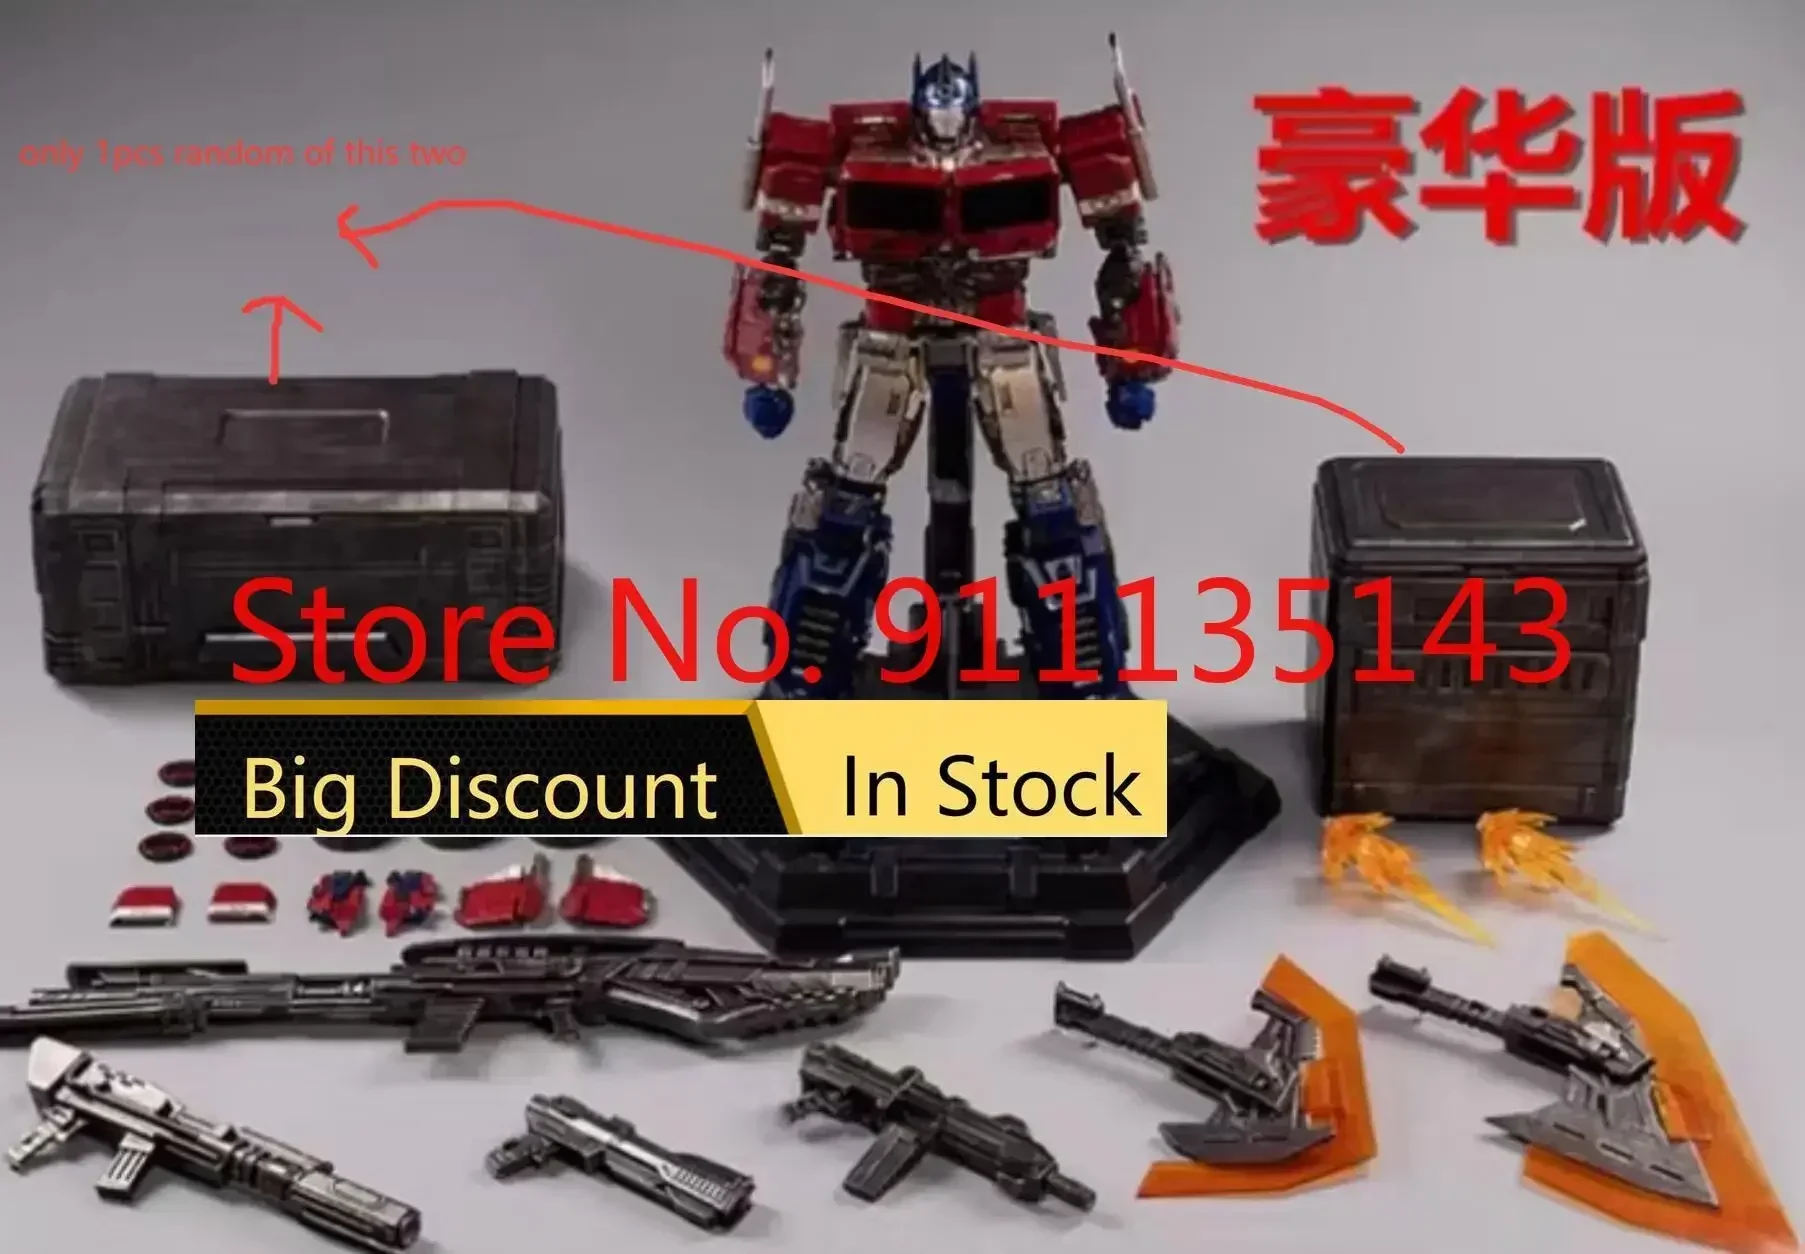 

Toyworld TW-F09 Deluxe Version Red Color In Stock